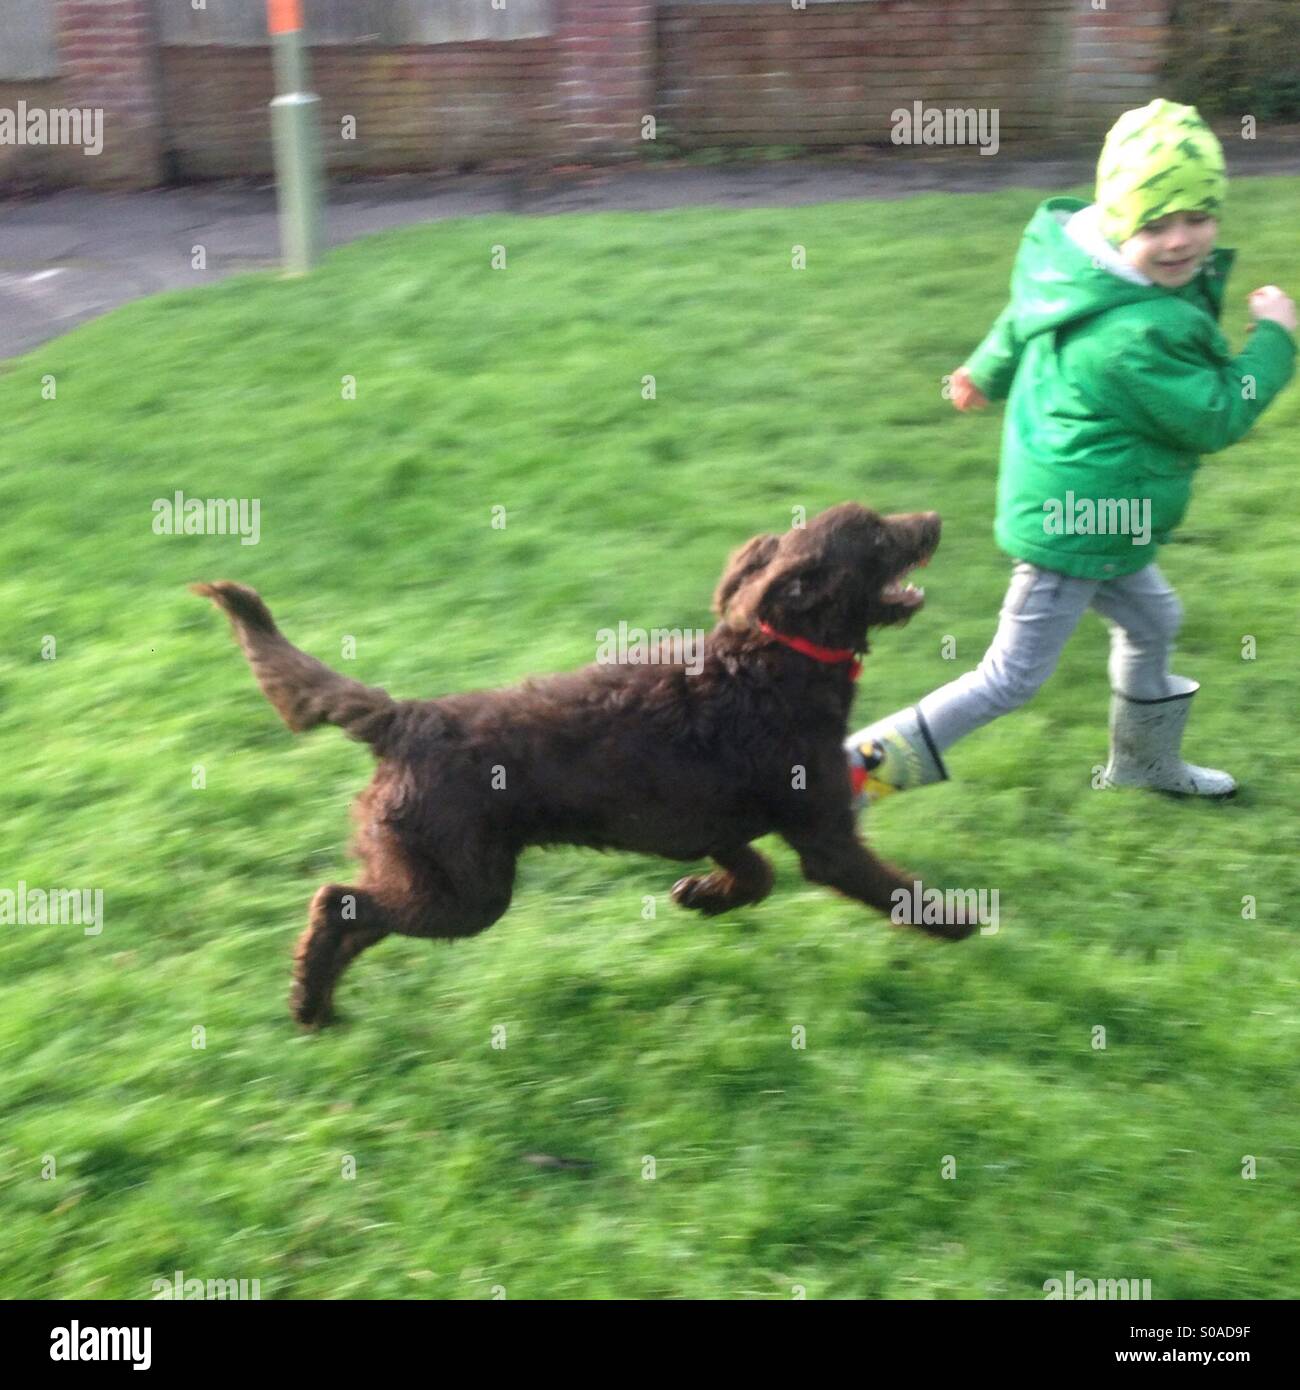 Five year old boy playing chase with his pet dog Stock Photo